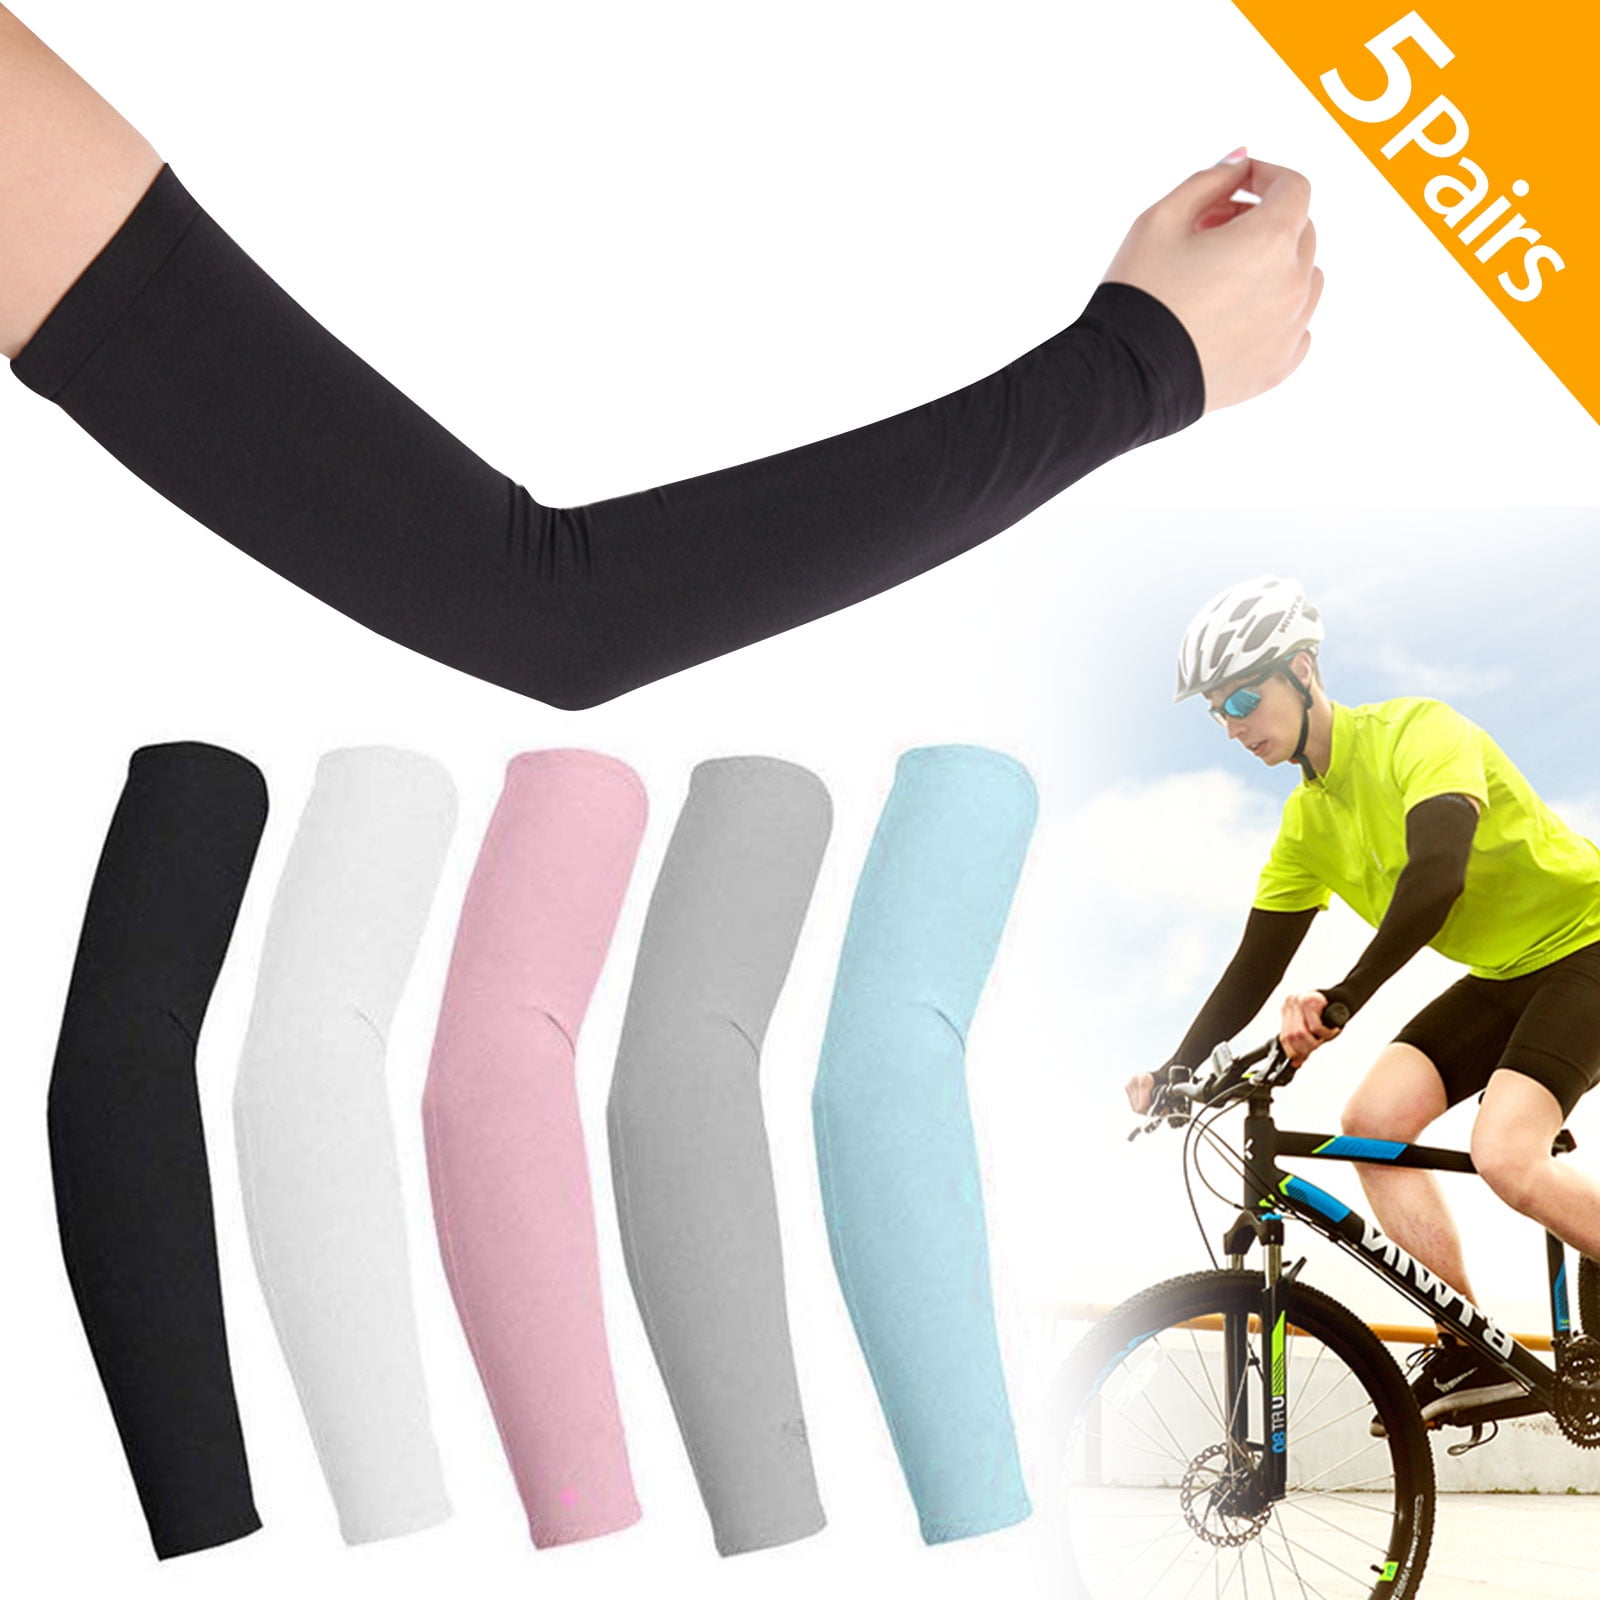 Sports Compression Arm Sleeves UV Sun Protection for Men Women Cycling Hiking 